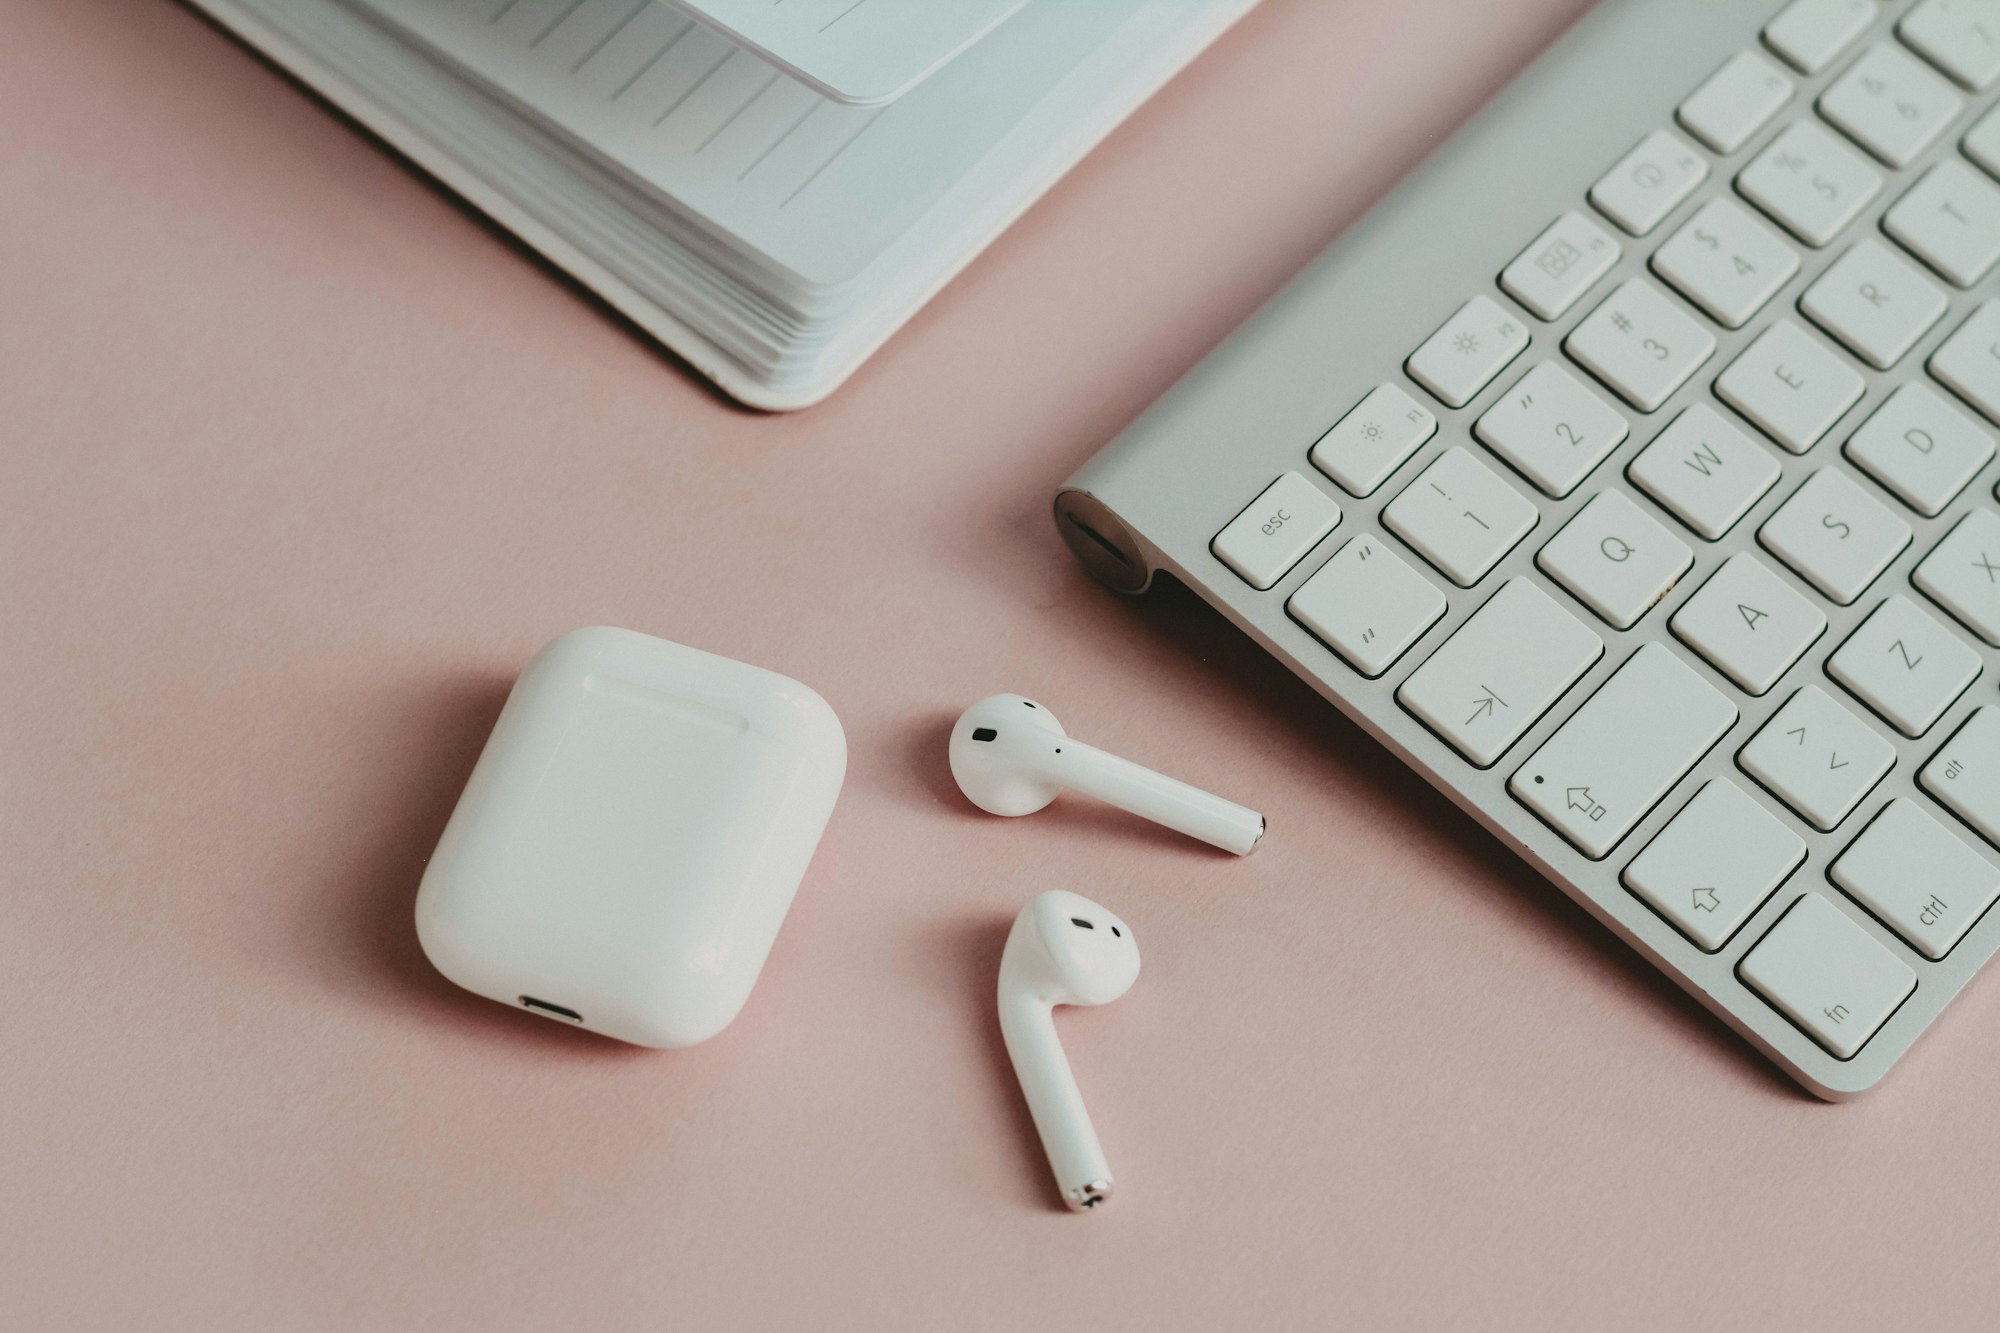 Air pods on pink ✦ Snag more FREE stock photos each month 👉 https://contentpixie.com/secret-snaps/